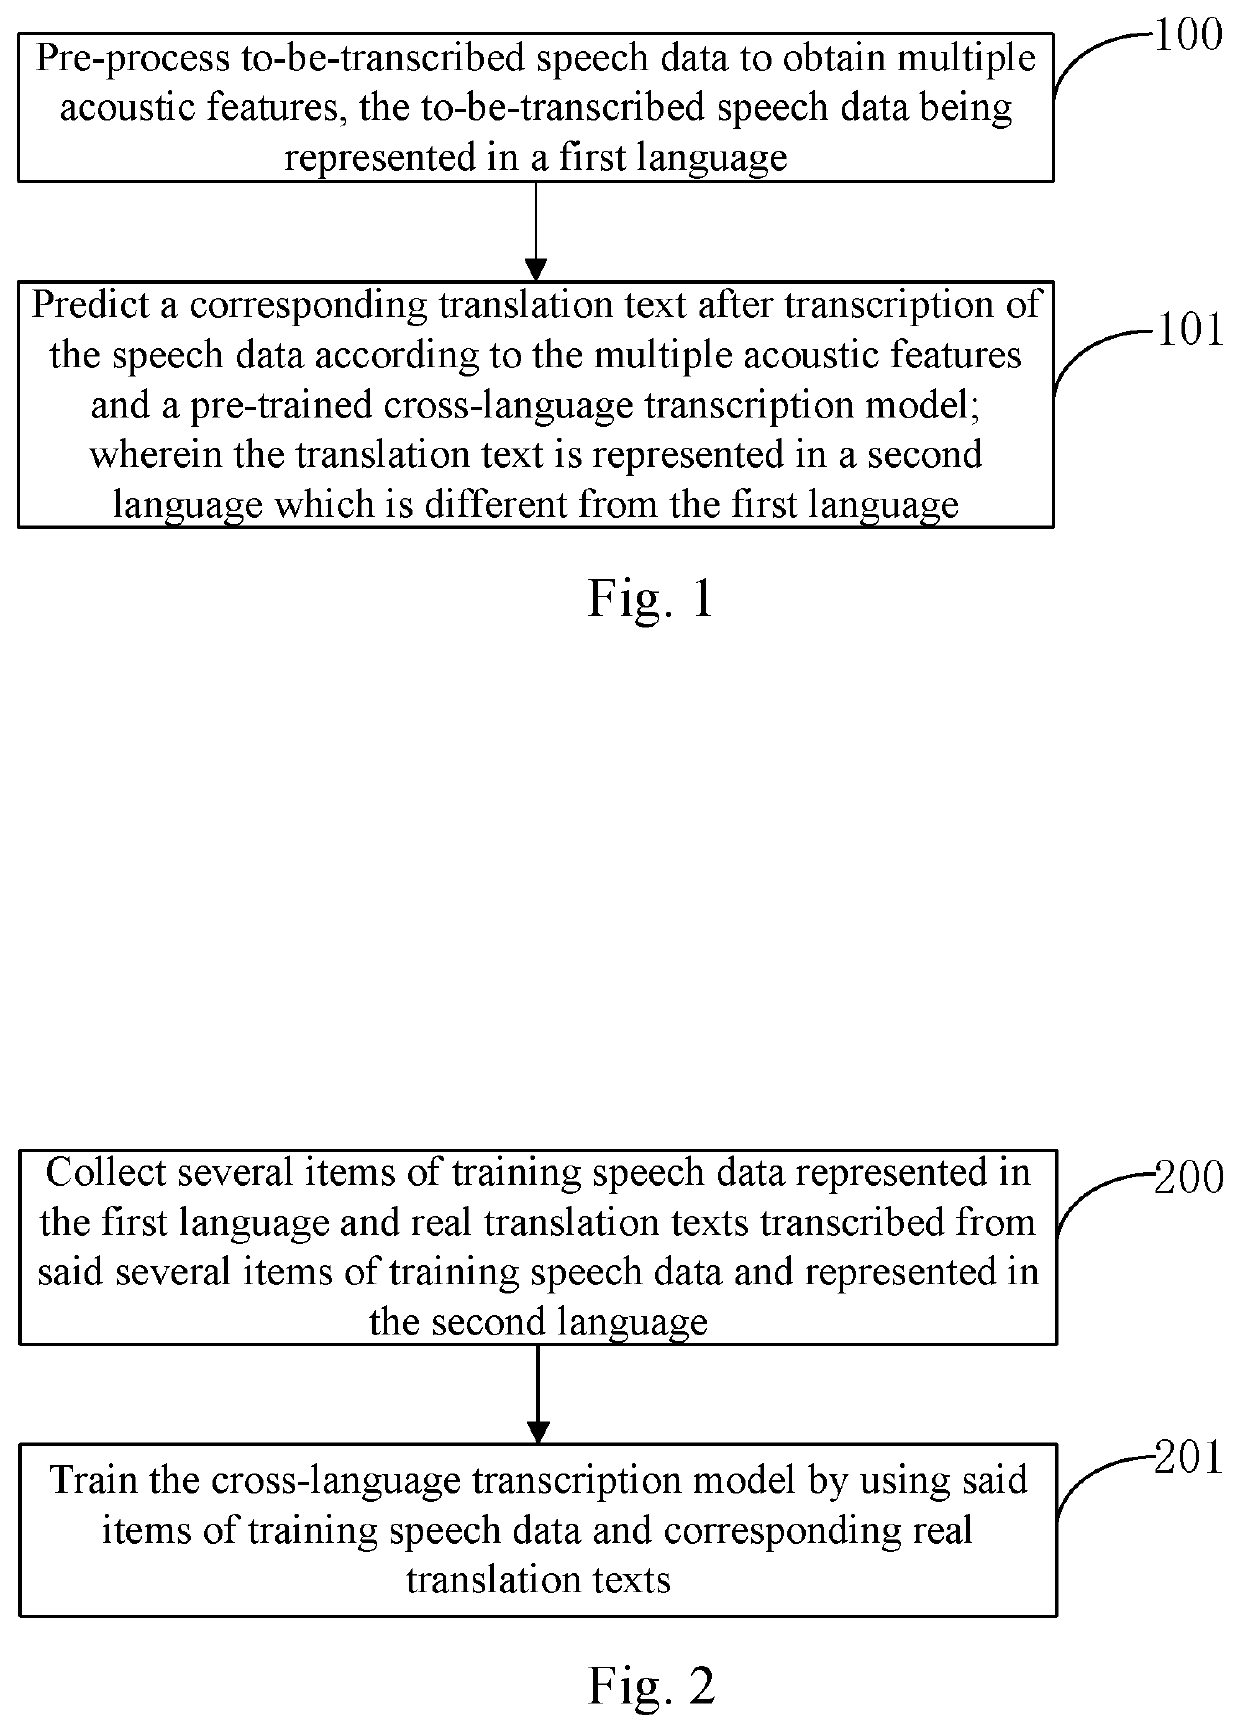 Artificial intelligence-based cross-language speech transcription method and apparatus, device and readable medium using Fbank40 acoustic feature format